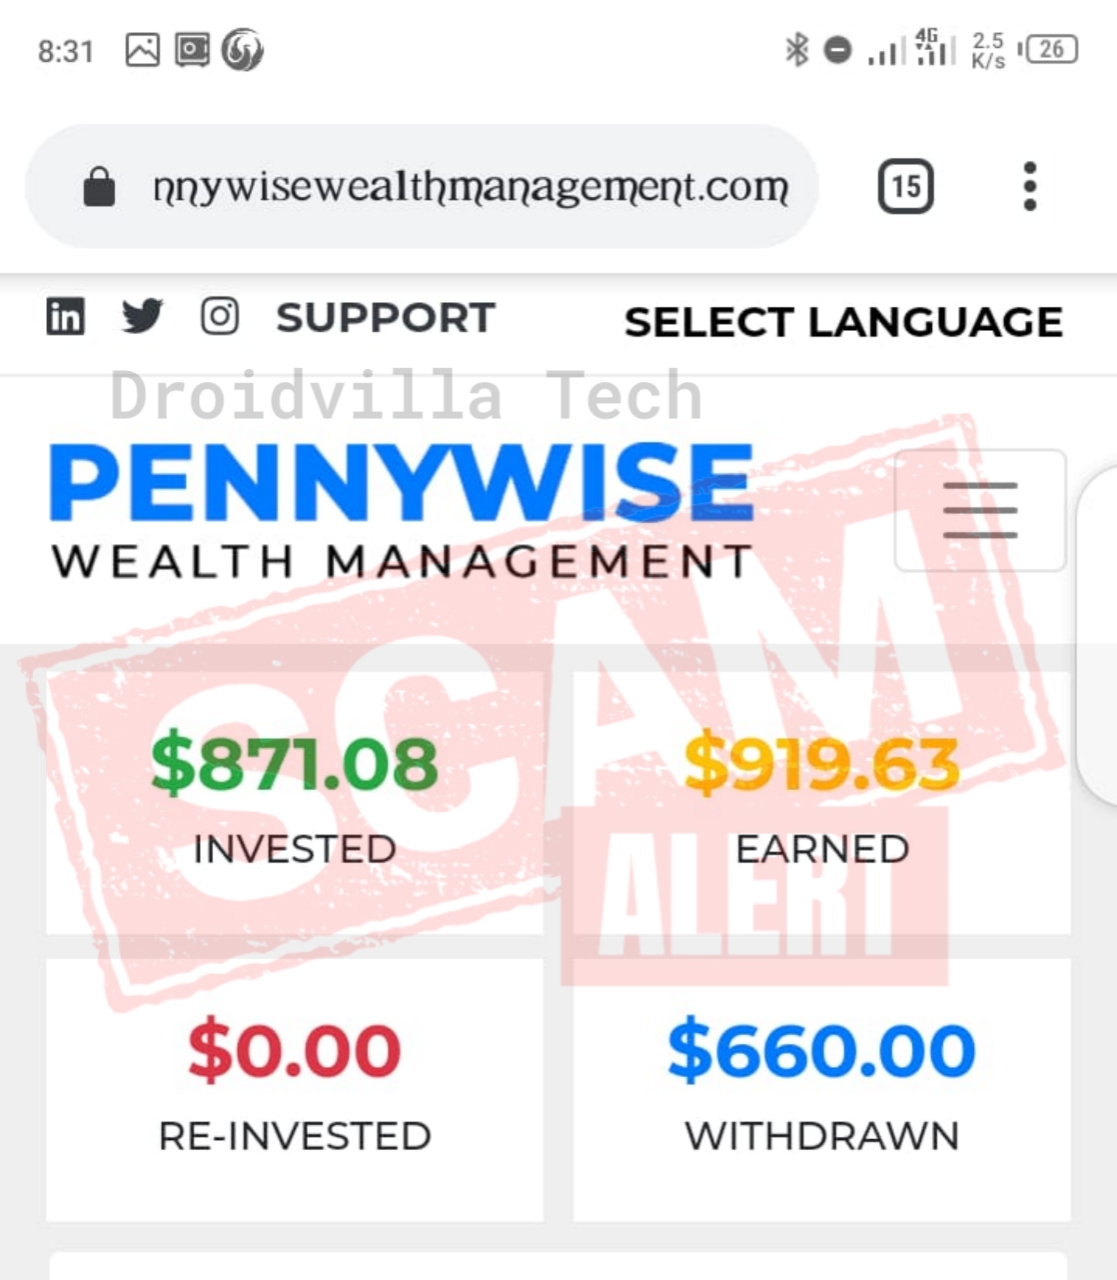 Pennywisewealthmanagement scam internet